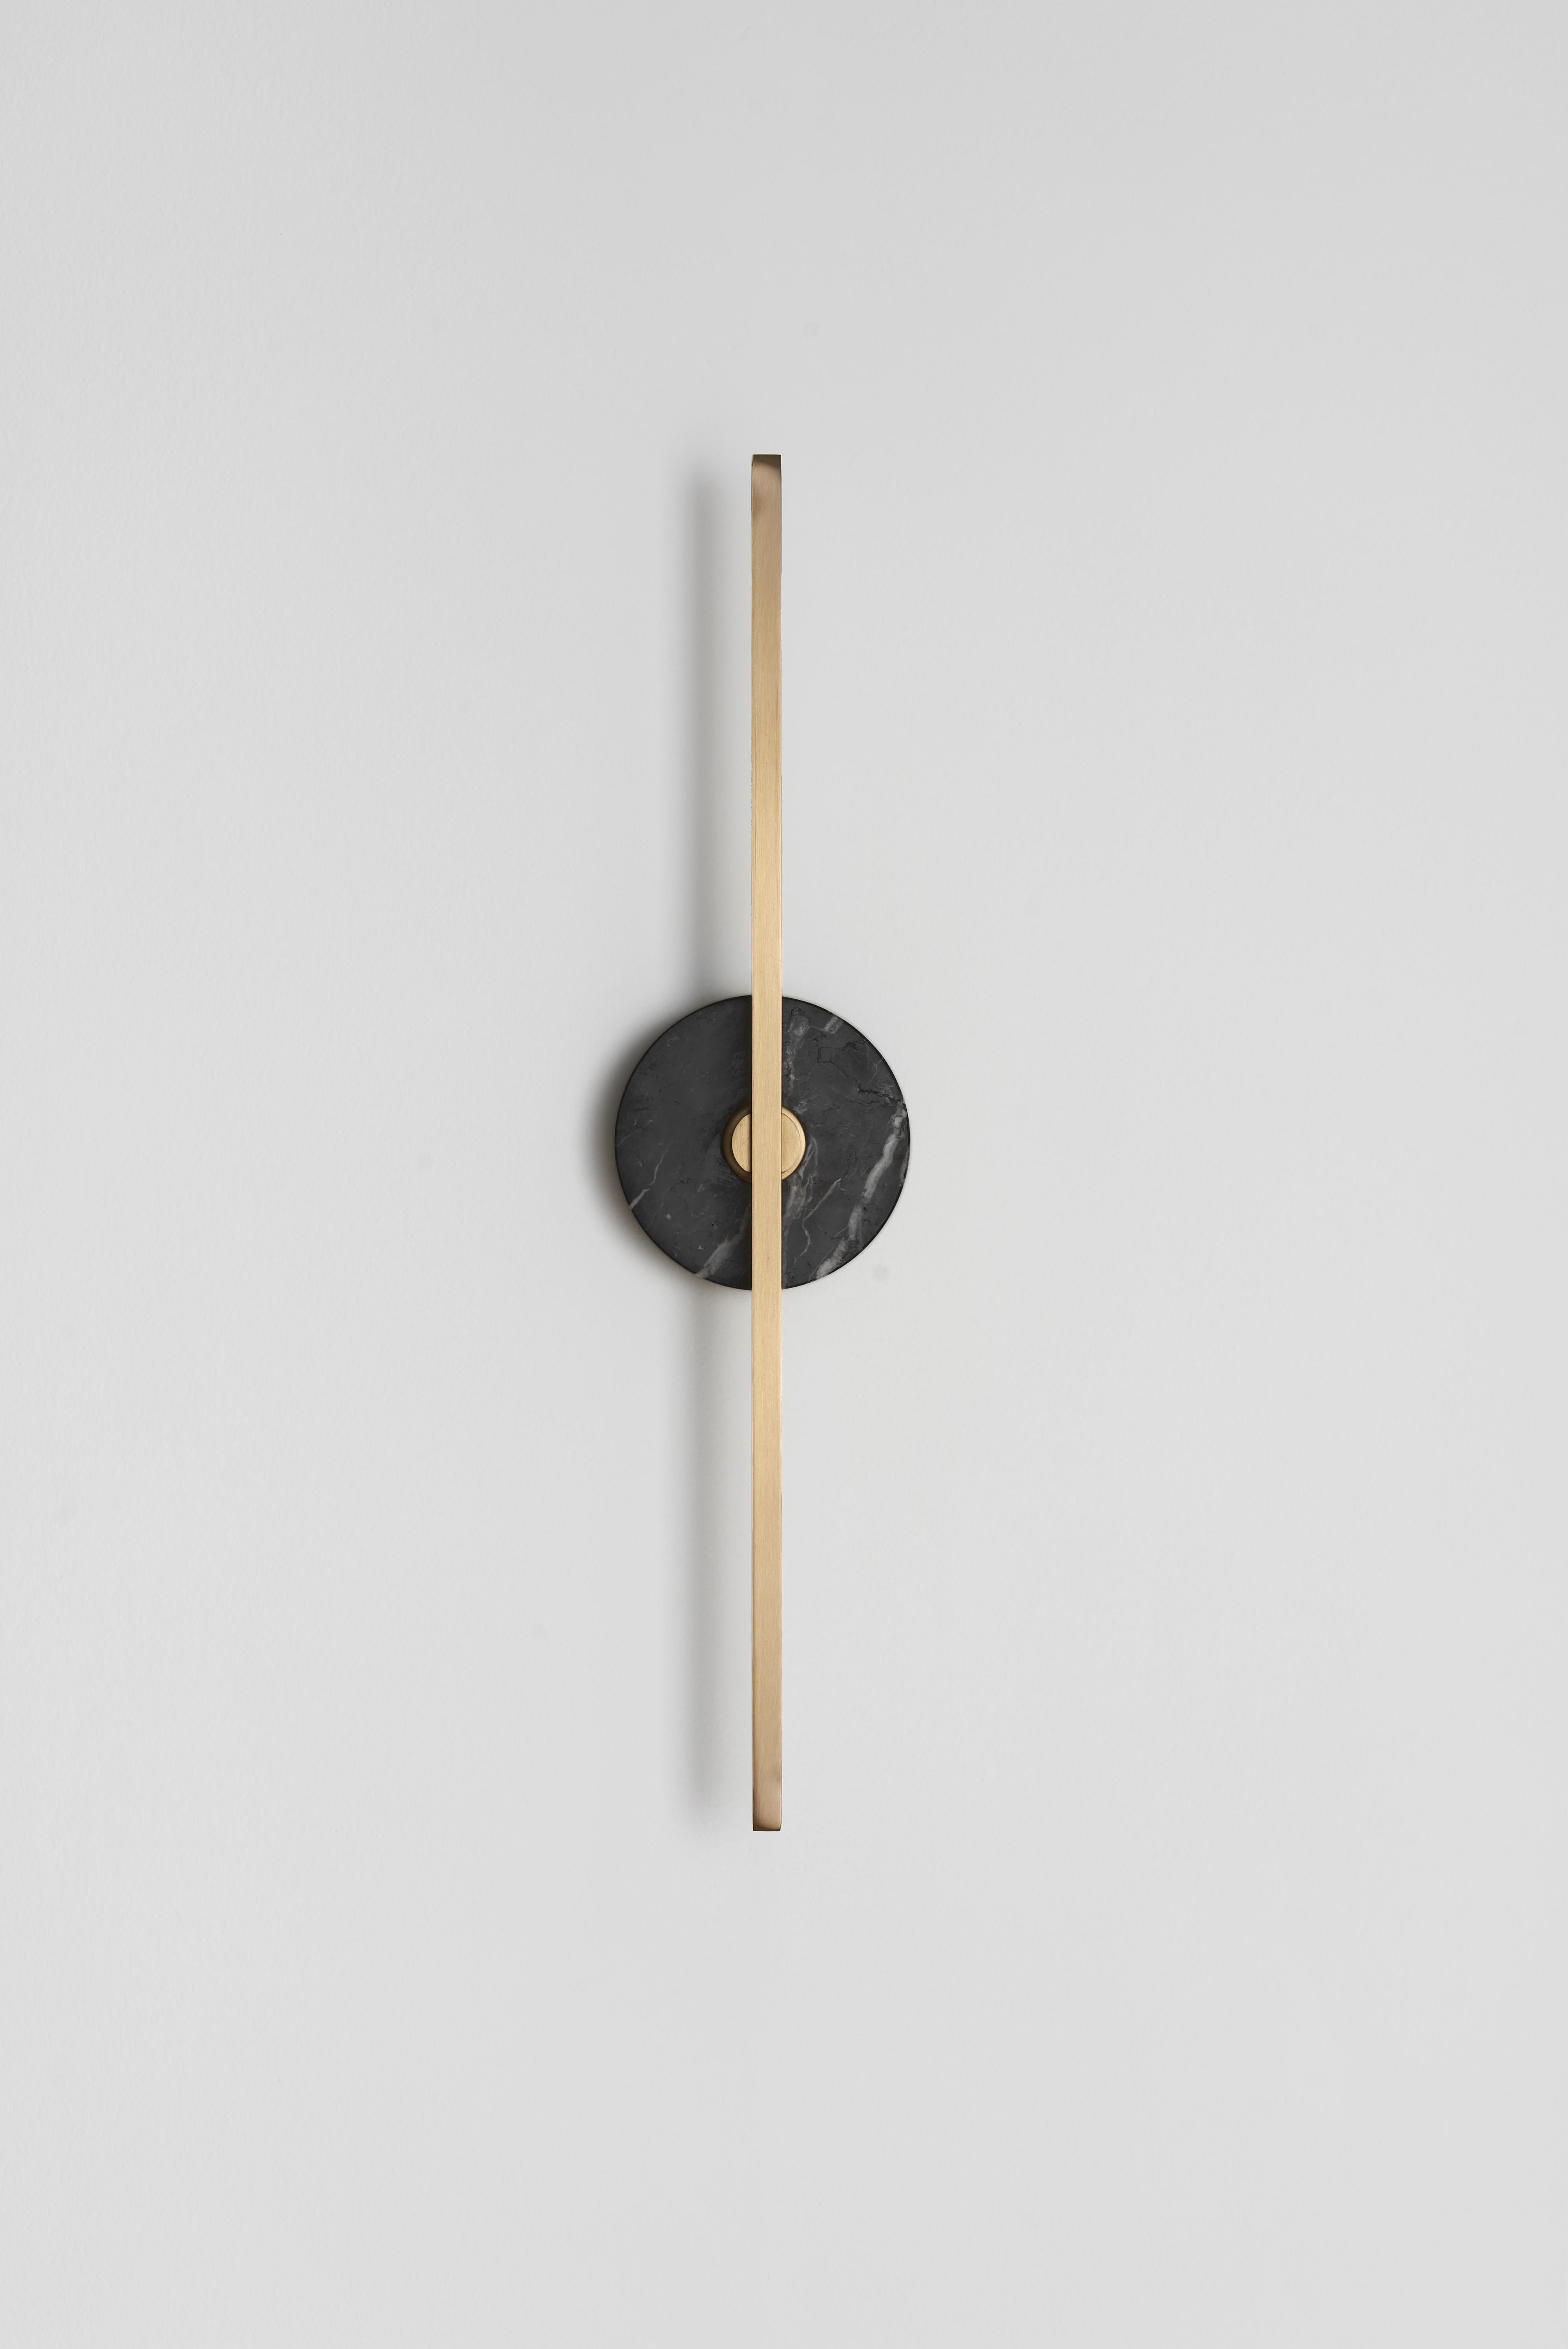 The stick wall sconce is a contemporary lighting fixture that features a Minimalist design with thin brass profiles and advanced LED technology. It emits a warm and diffused light that adds a cozy and inviting atmosphere to any room.

The black